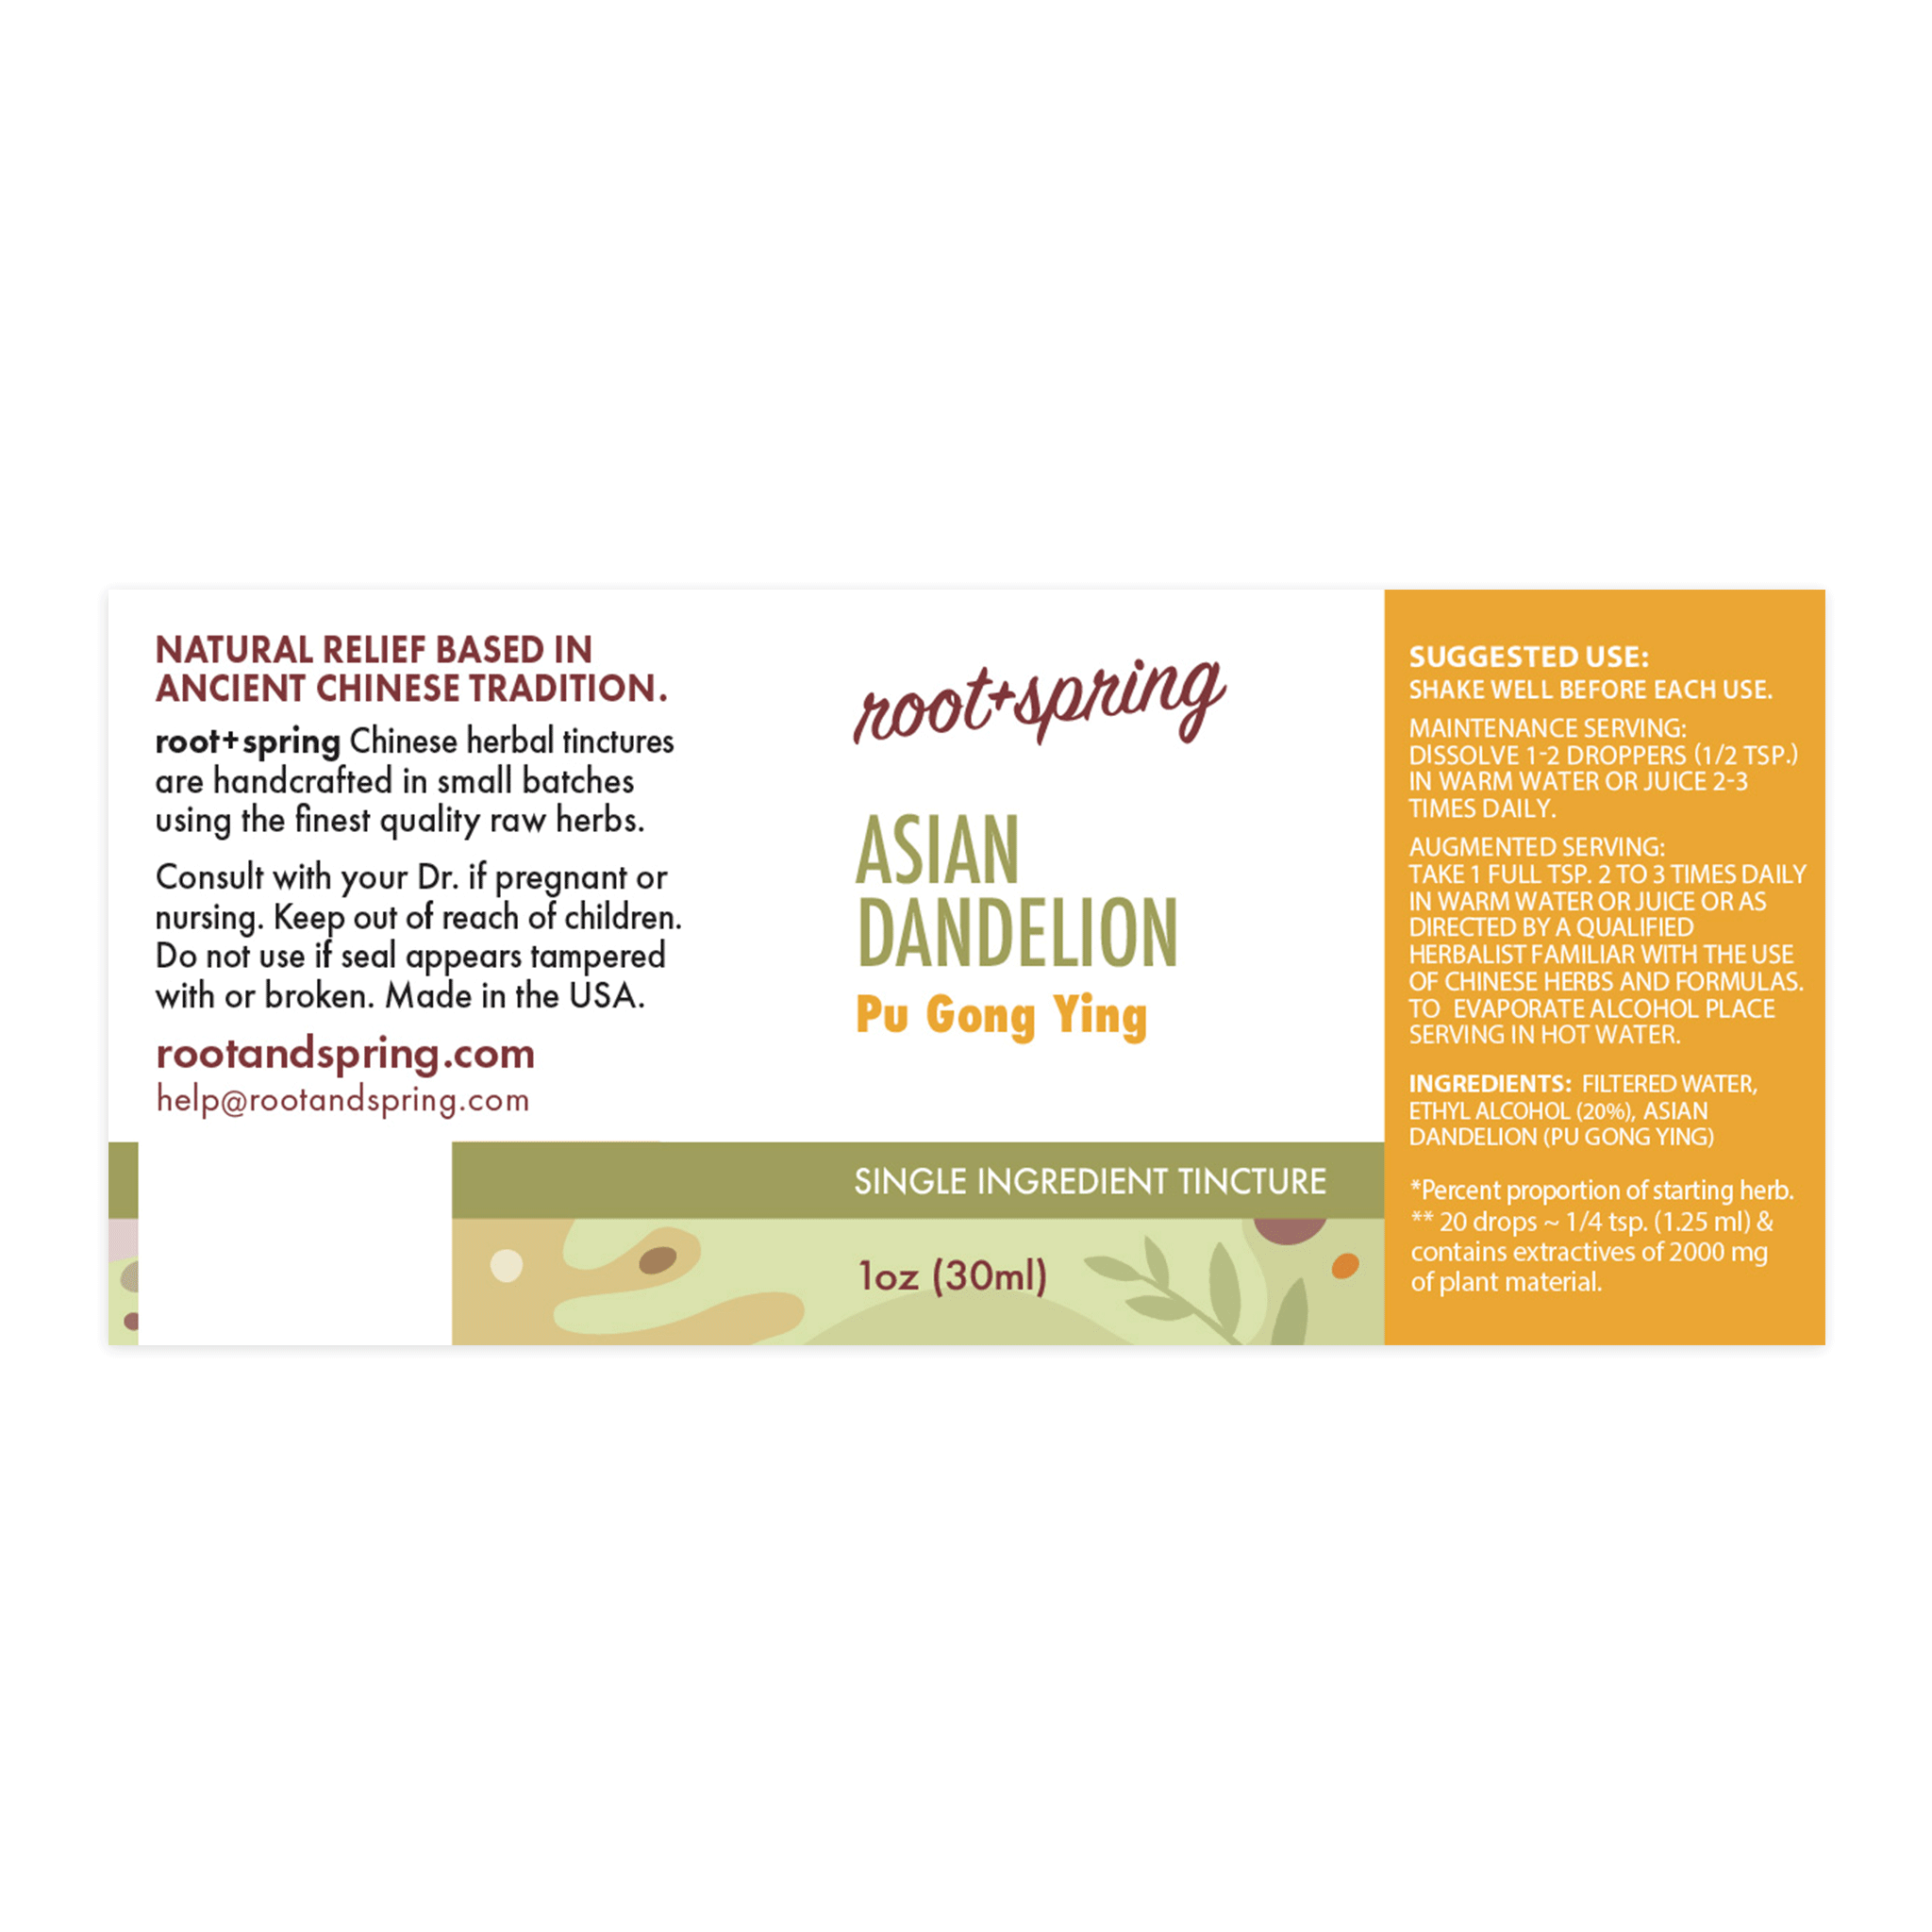 Label for Asian Dandelion, or Pu Gong Ying, Herbal Tincture by root + spring.